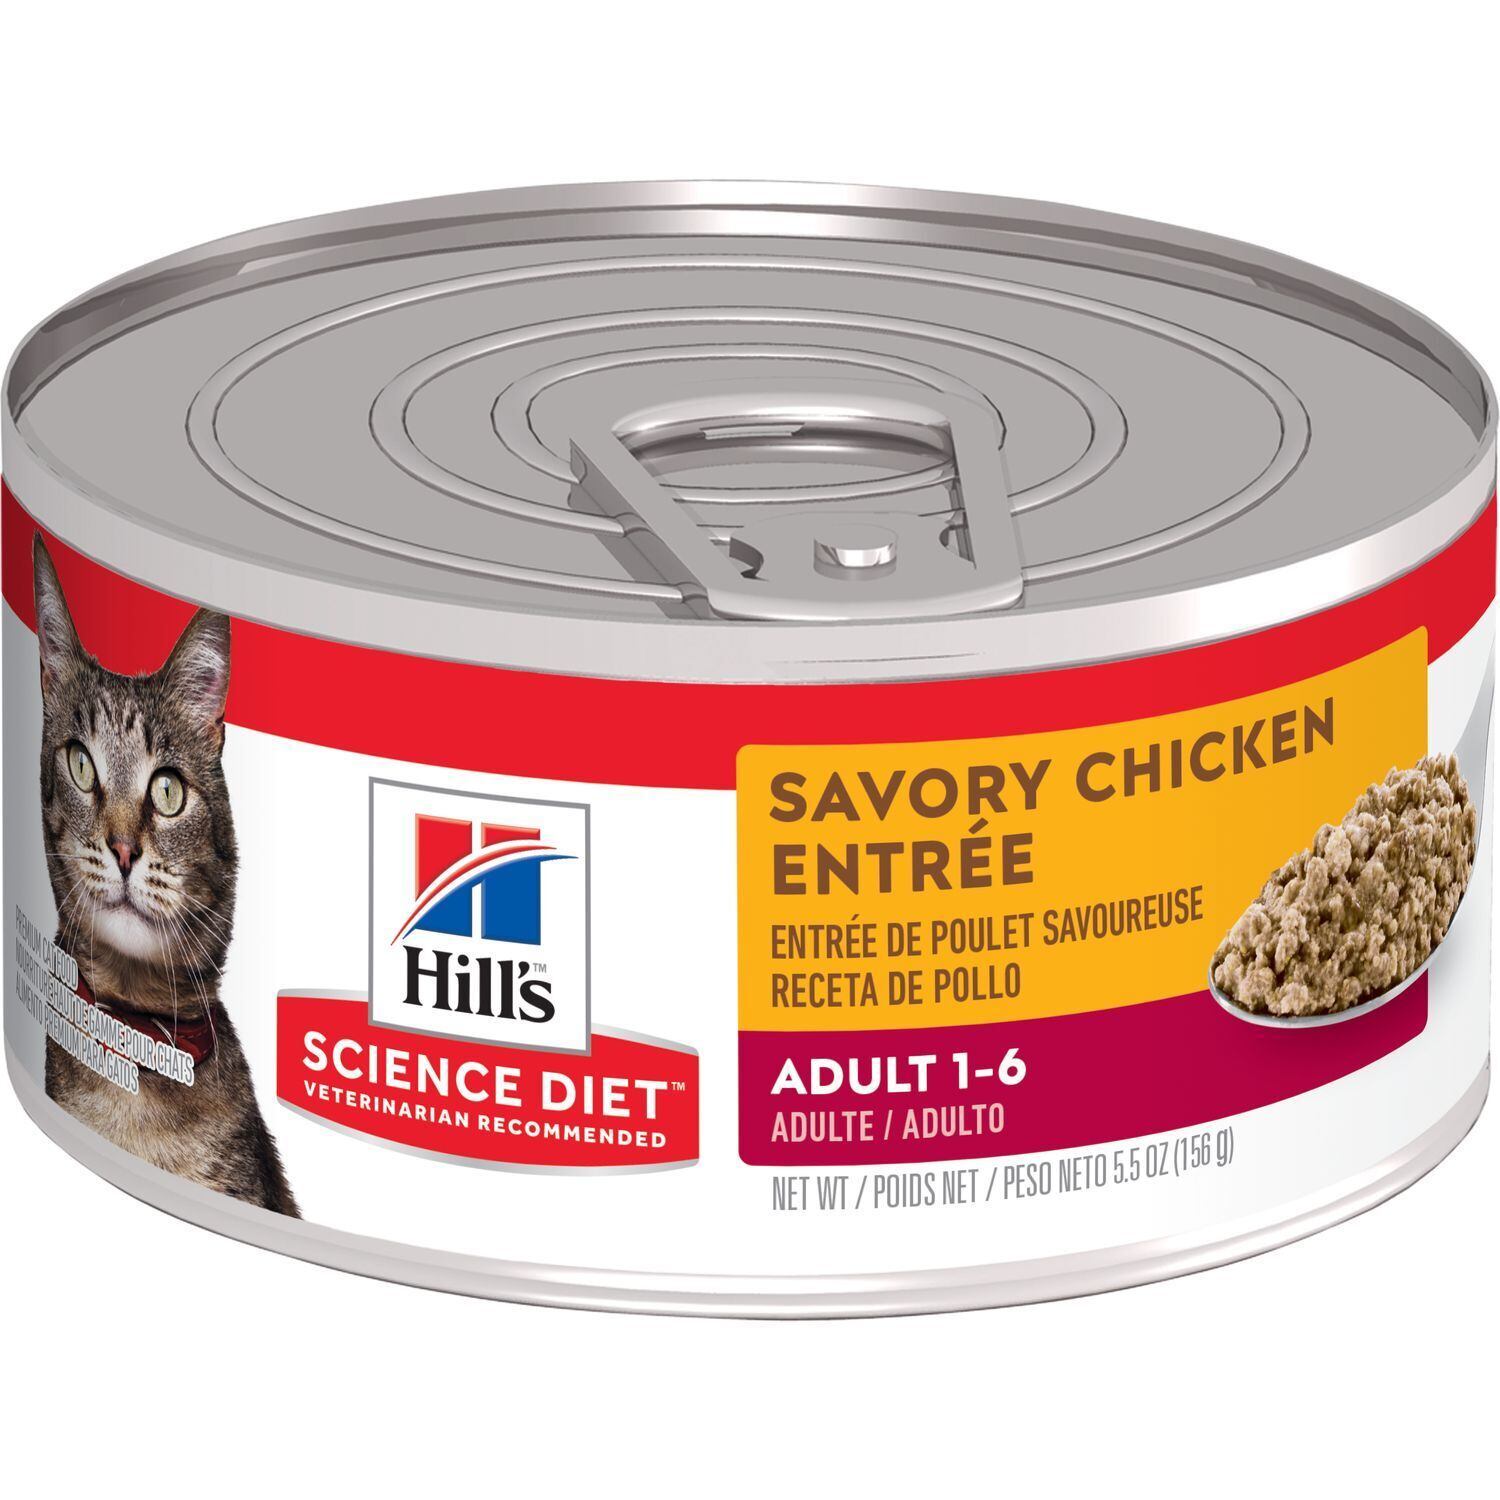 sd feline adult savory chicken entree canned productShot zoom